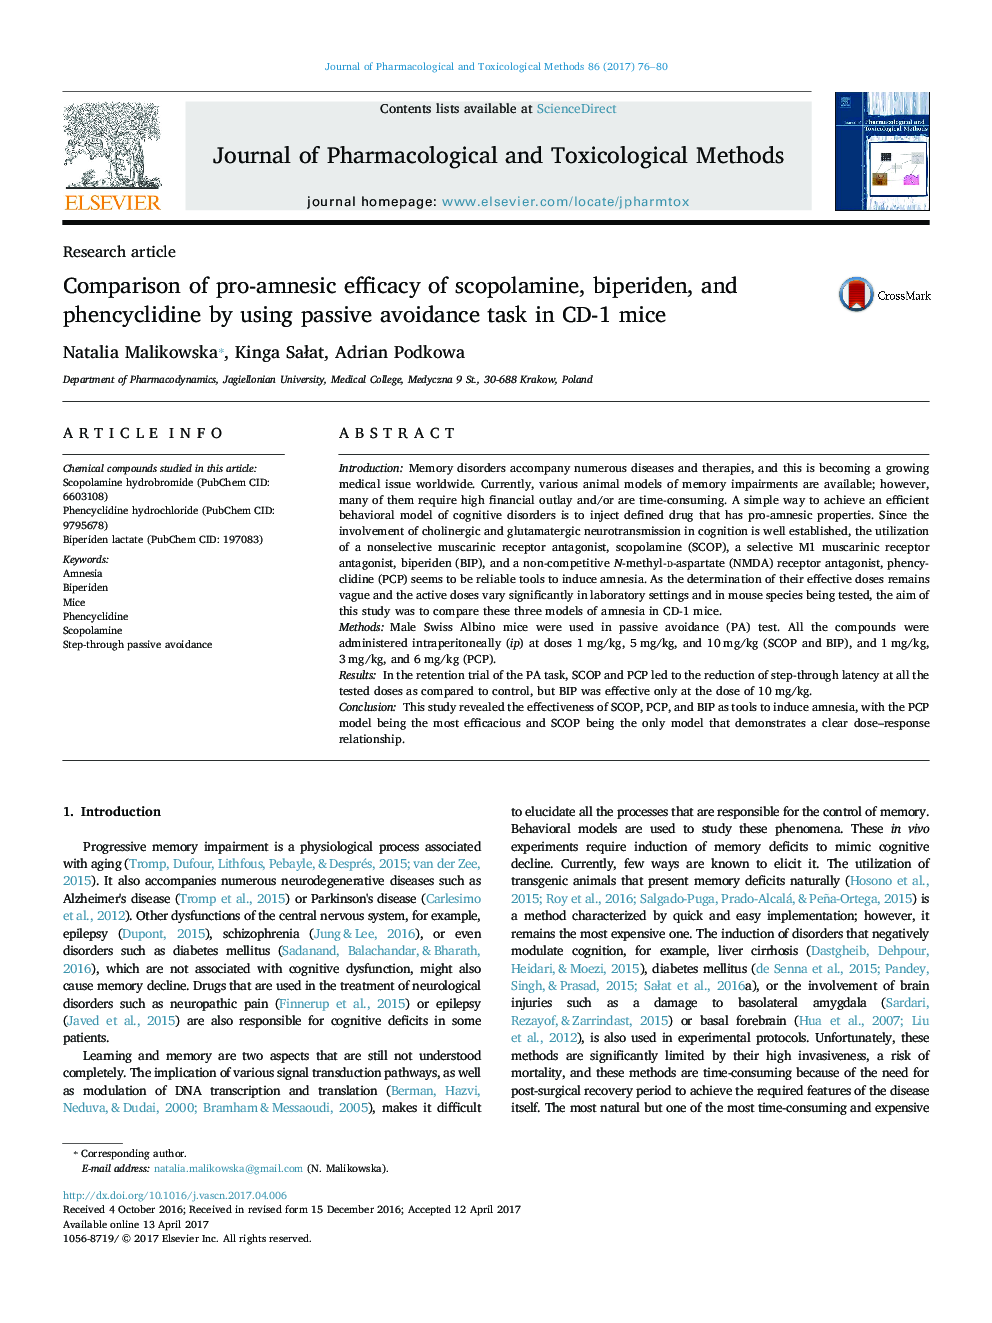 Comparison of pro-amnesic efficacy of scopolamine, biperiden, and phencyclidine by using passive avoidance task in CD-1 mice